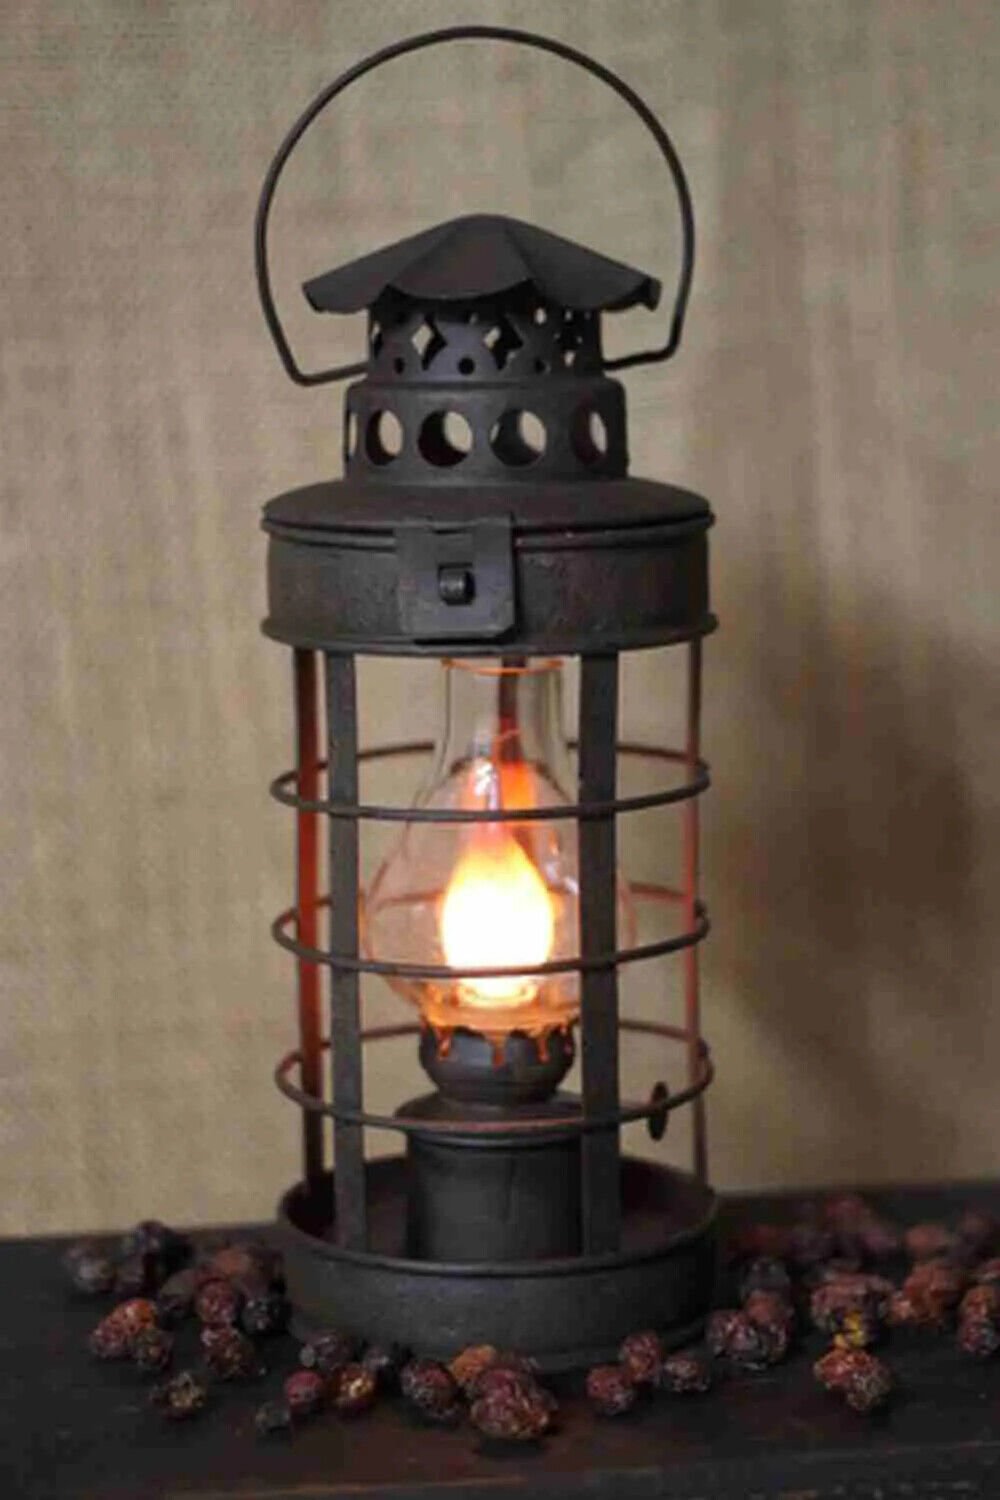 Primitive Colonial Electric Metal Coach Lantern Accent Table Light - The Primitive Pineapple Collection